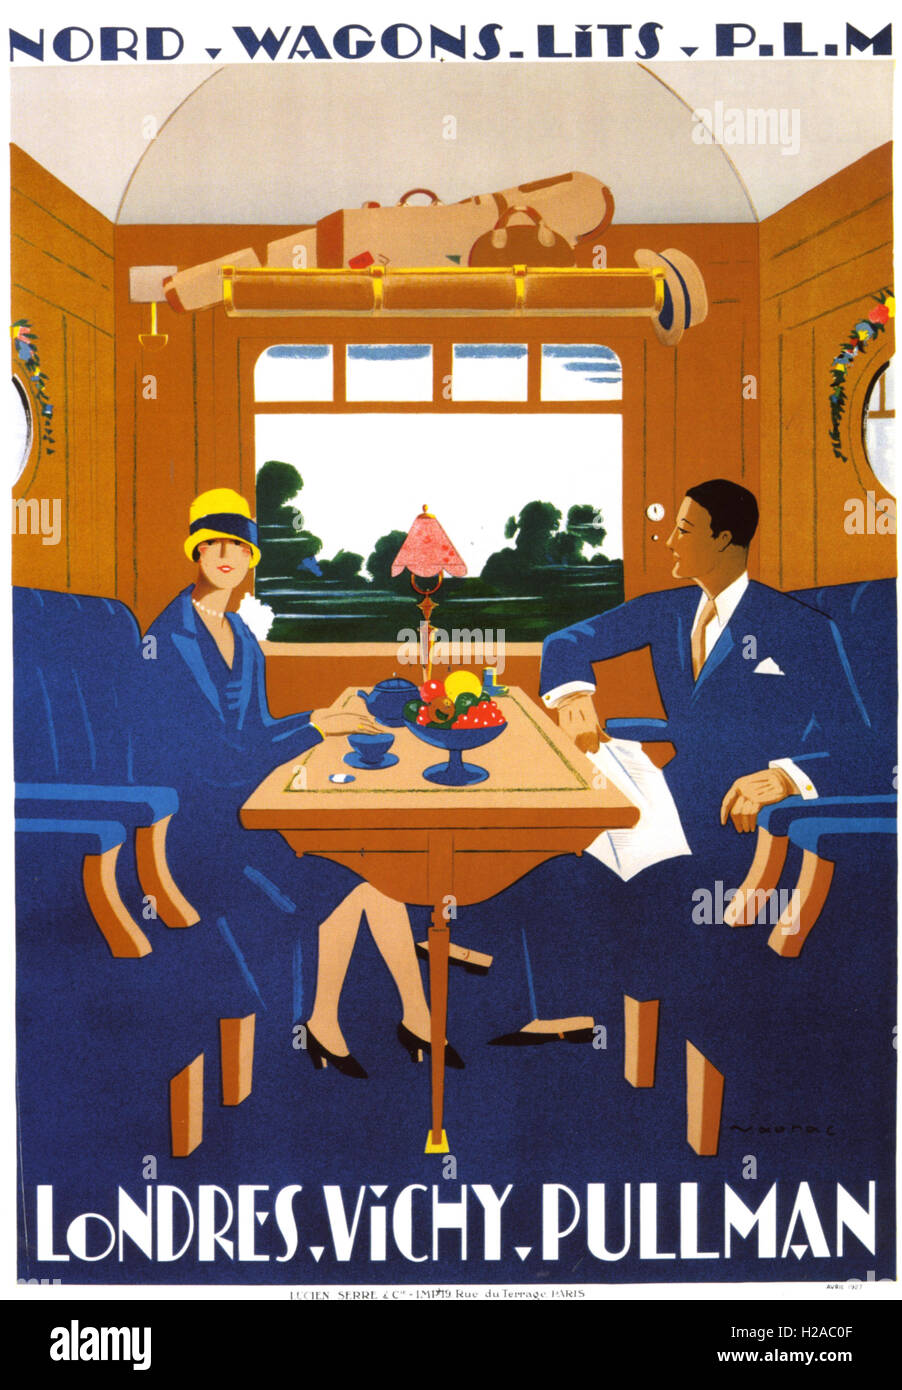 PULLMAN COMPANY  1927 advert for a French railway company featuring the luxury of Pullman cars on the London to Vichy route Stock Photo